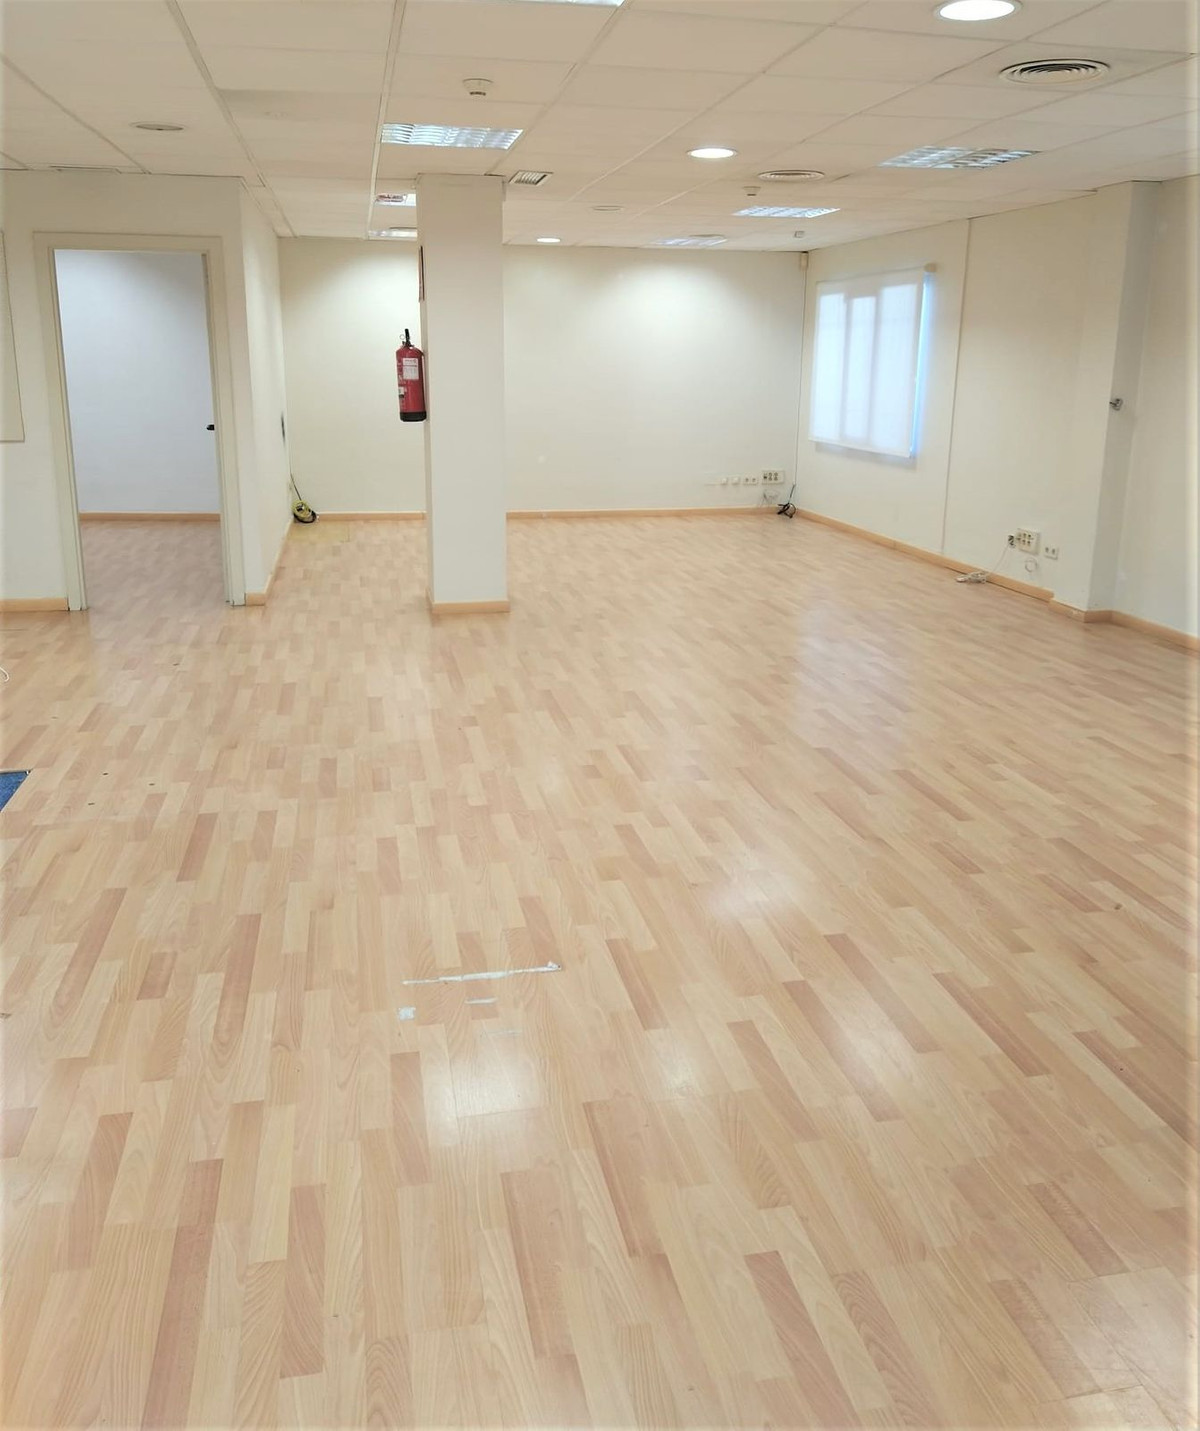 						Commercial  Commercial Premises
													for sale 
																			 in Fuengirola
					